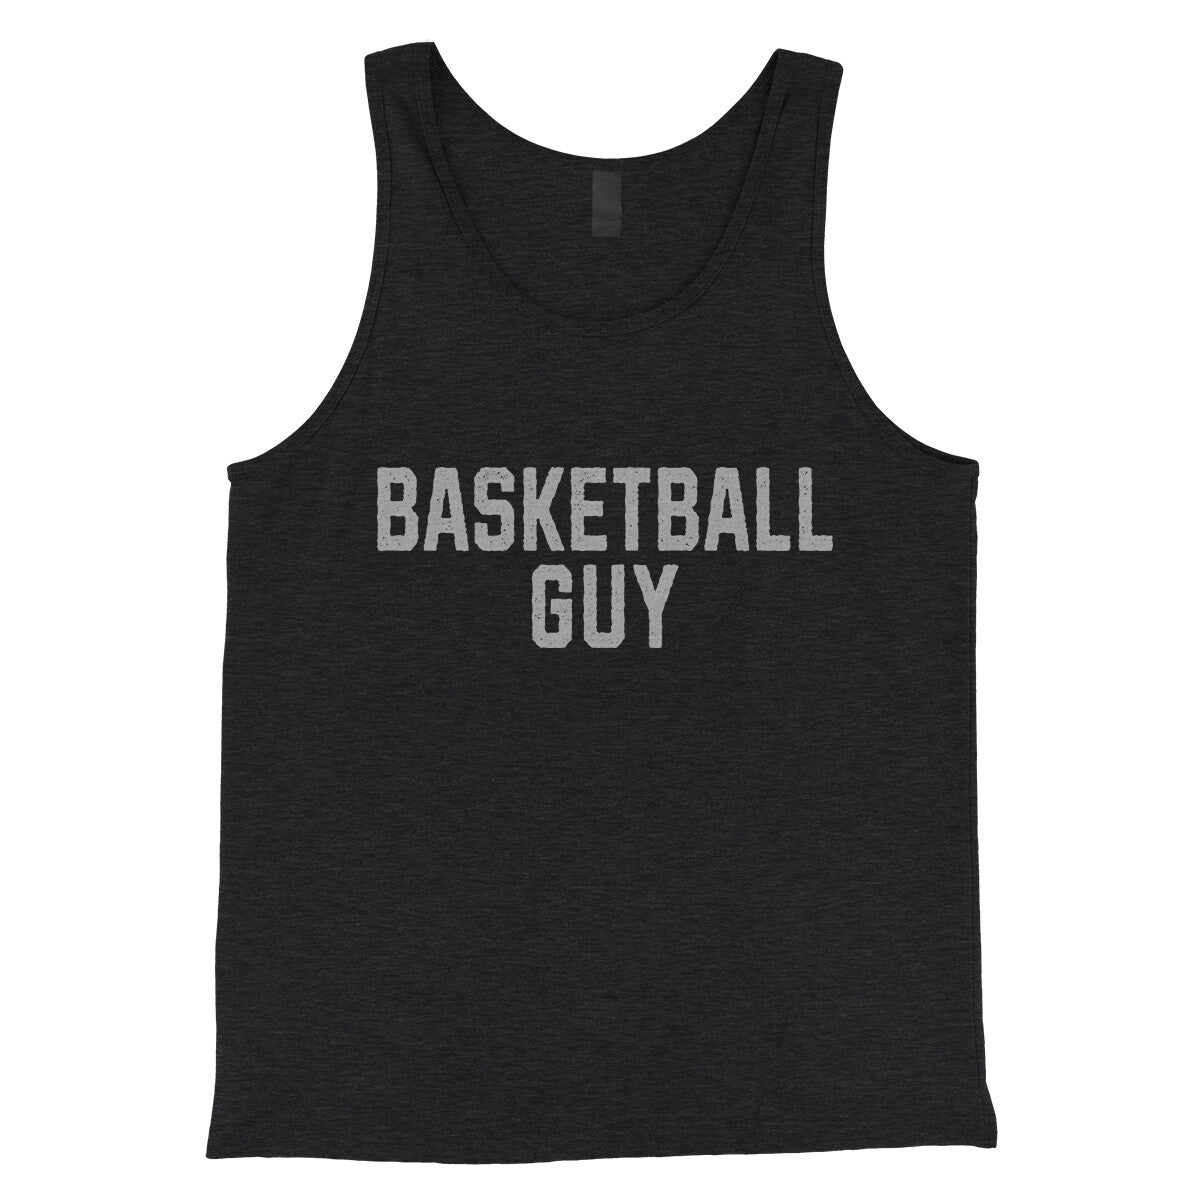 Basketball Guy in Charcoal Black TriBlend Color